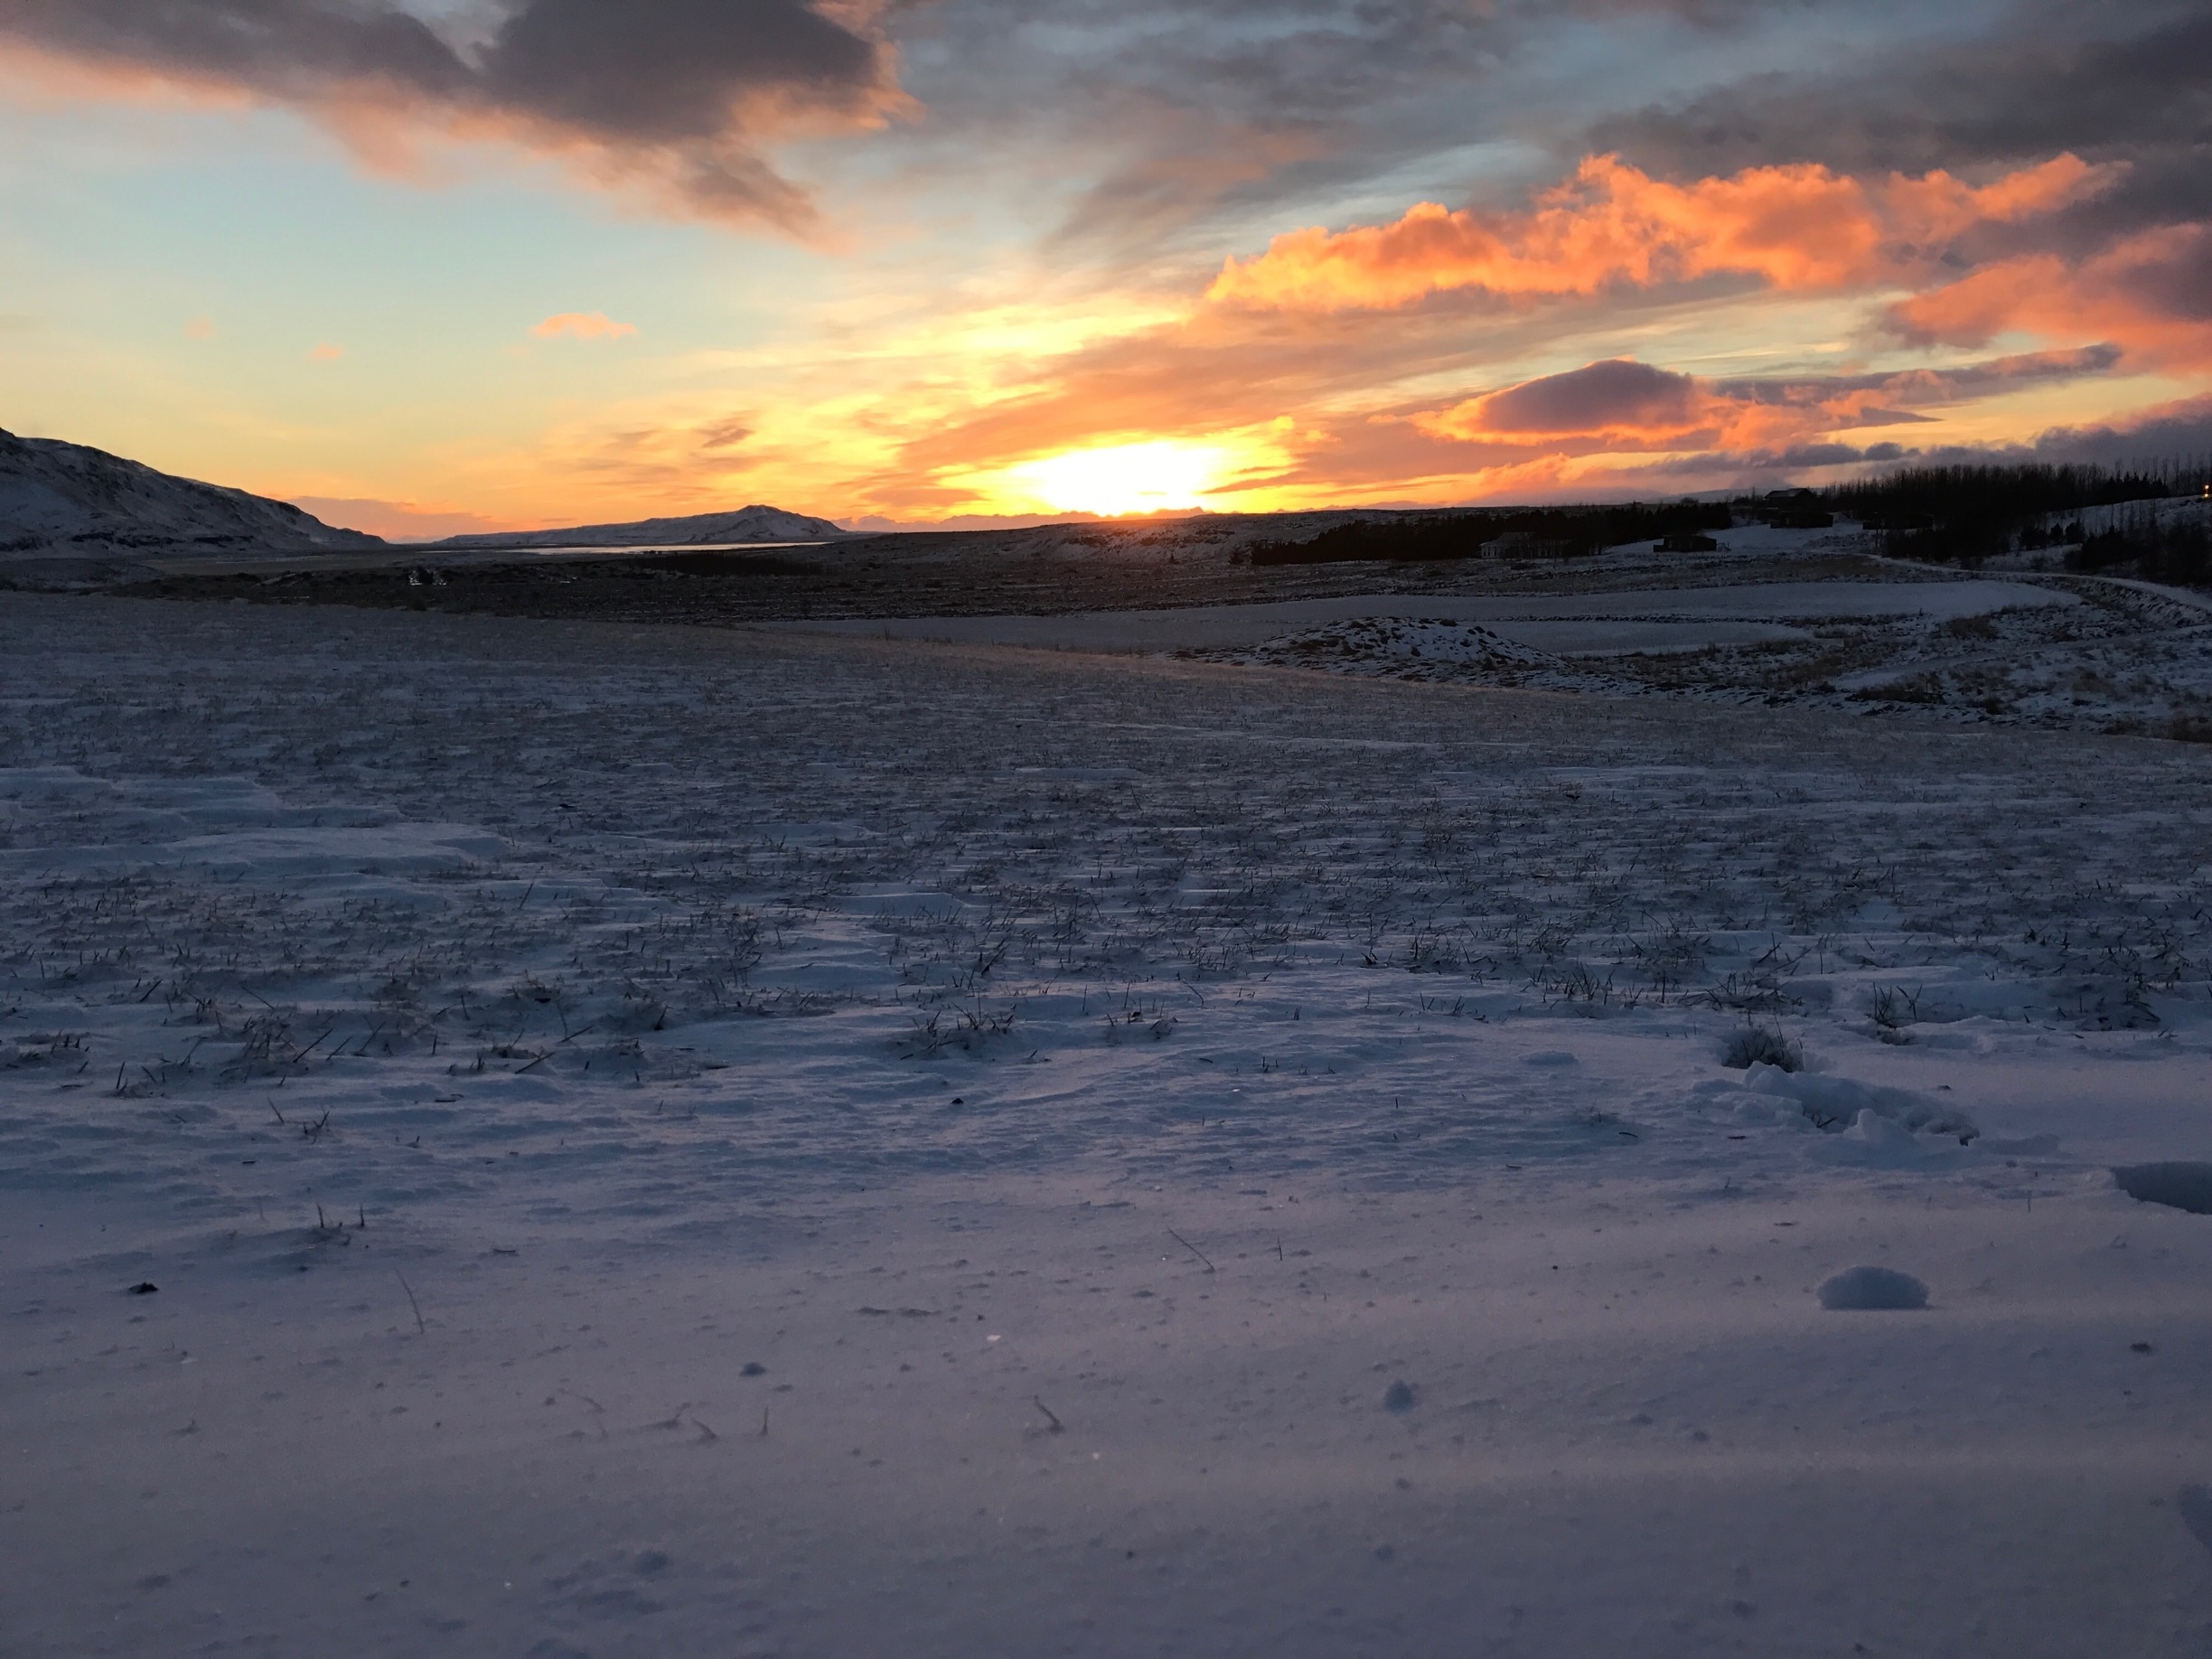 The sunsets are ridiculous when the ground is covered in snow! ❄️ #iceland #WinterWonders